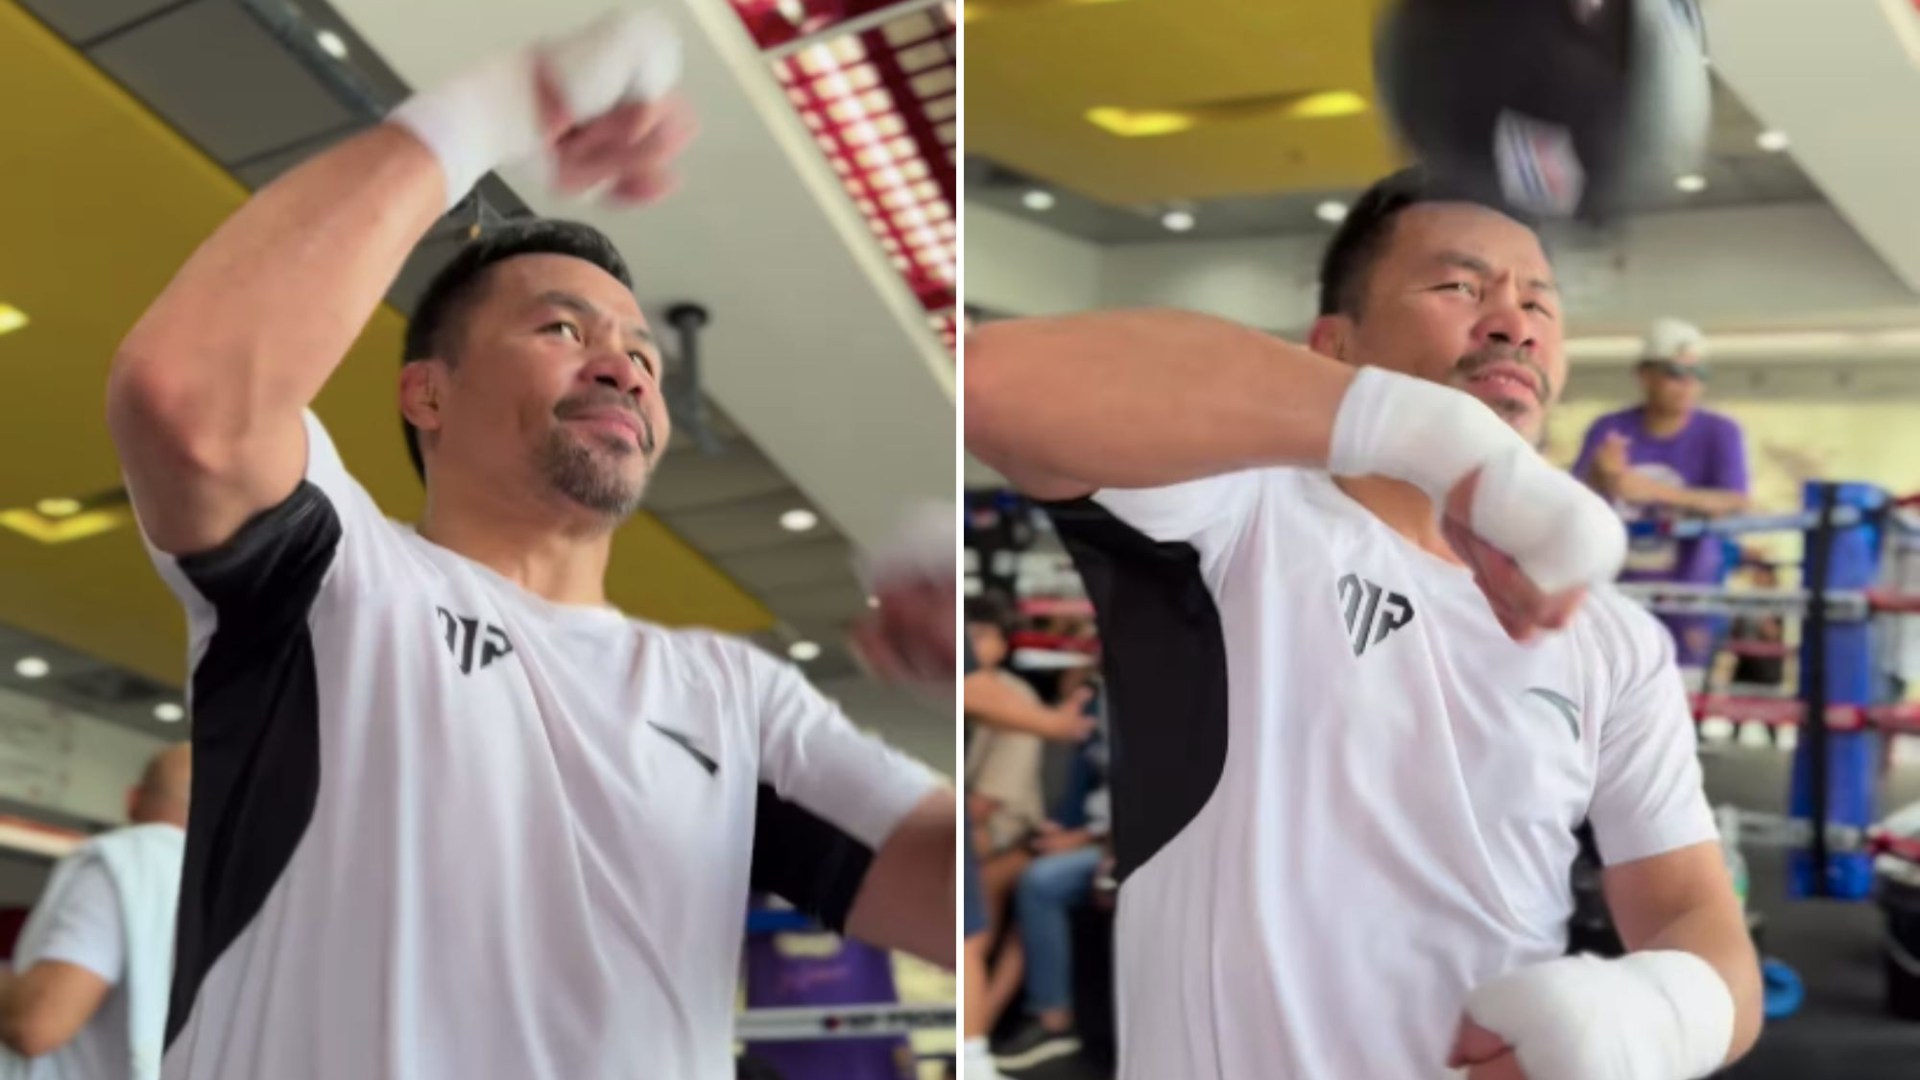 Manny Pacquiao, 45, shows off stunning speed as boxing icon comes out of retirement with two sensational fights on table [Video]